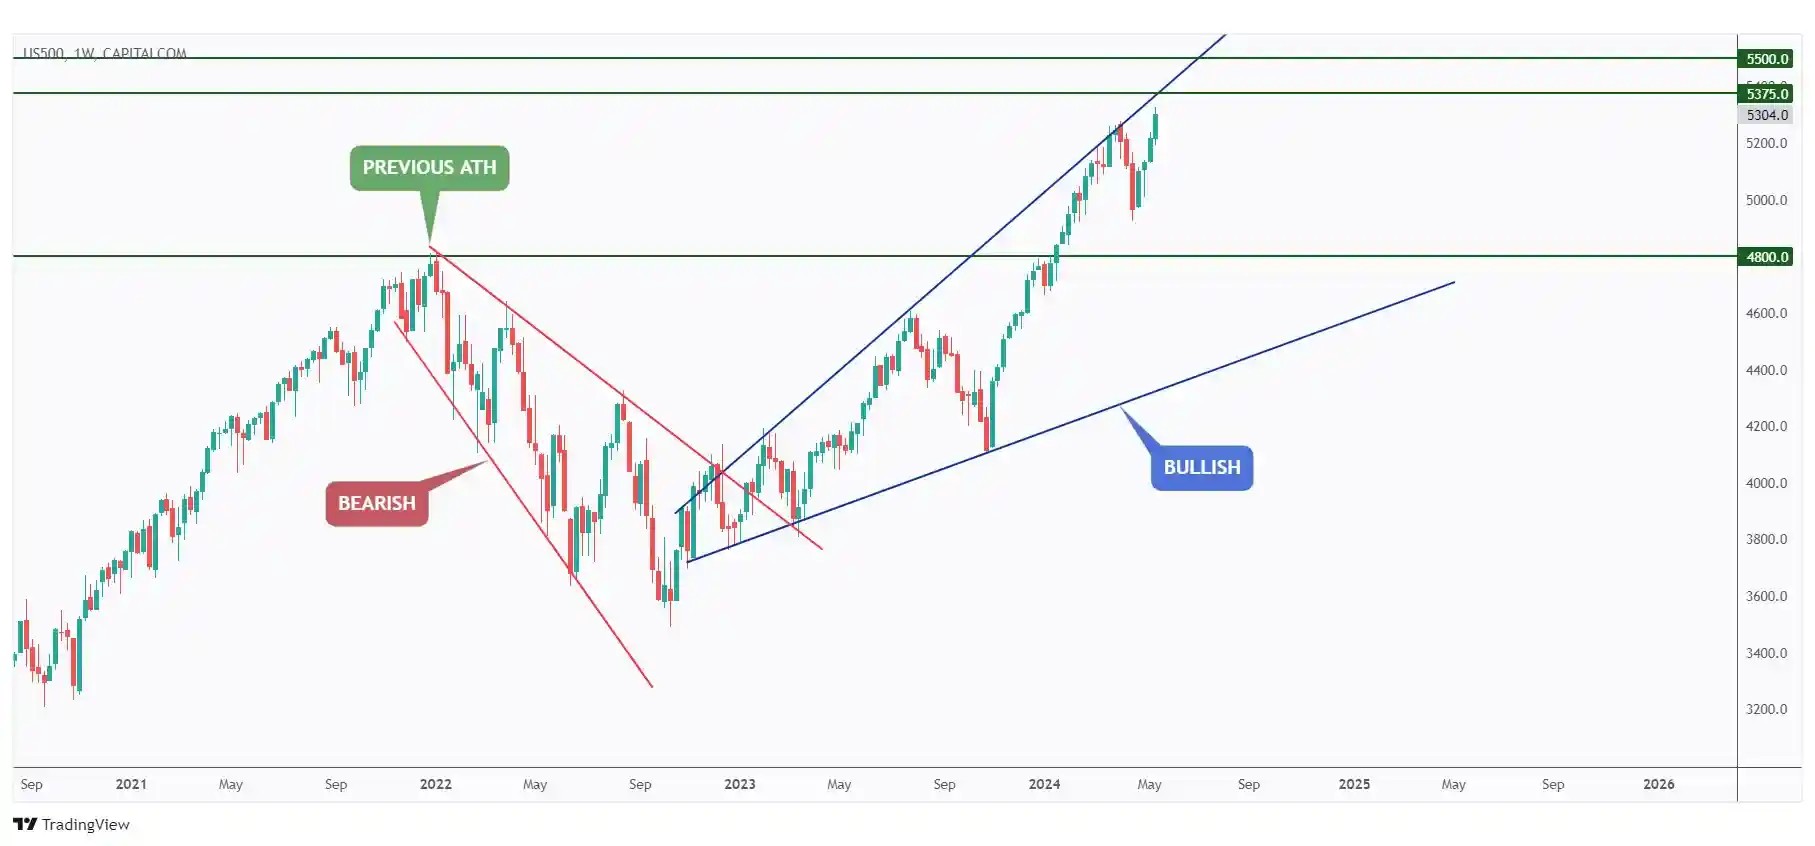 US500 weekly chart overall bullish and currently hovering around the upper bound of the wedge and $5375.